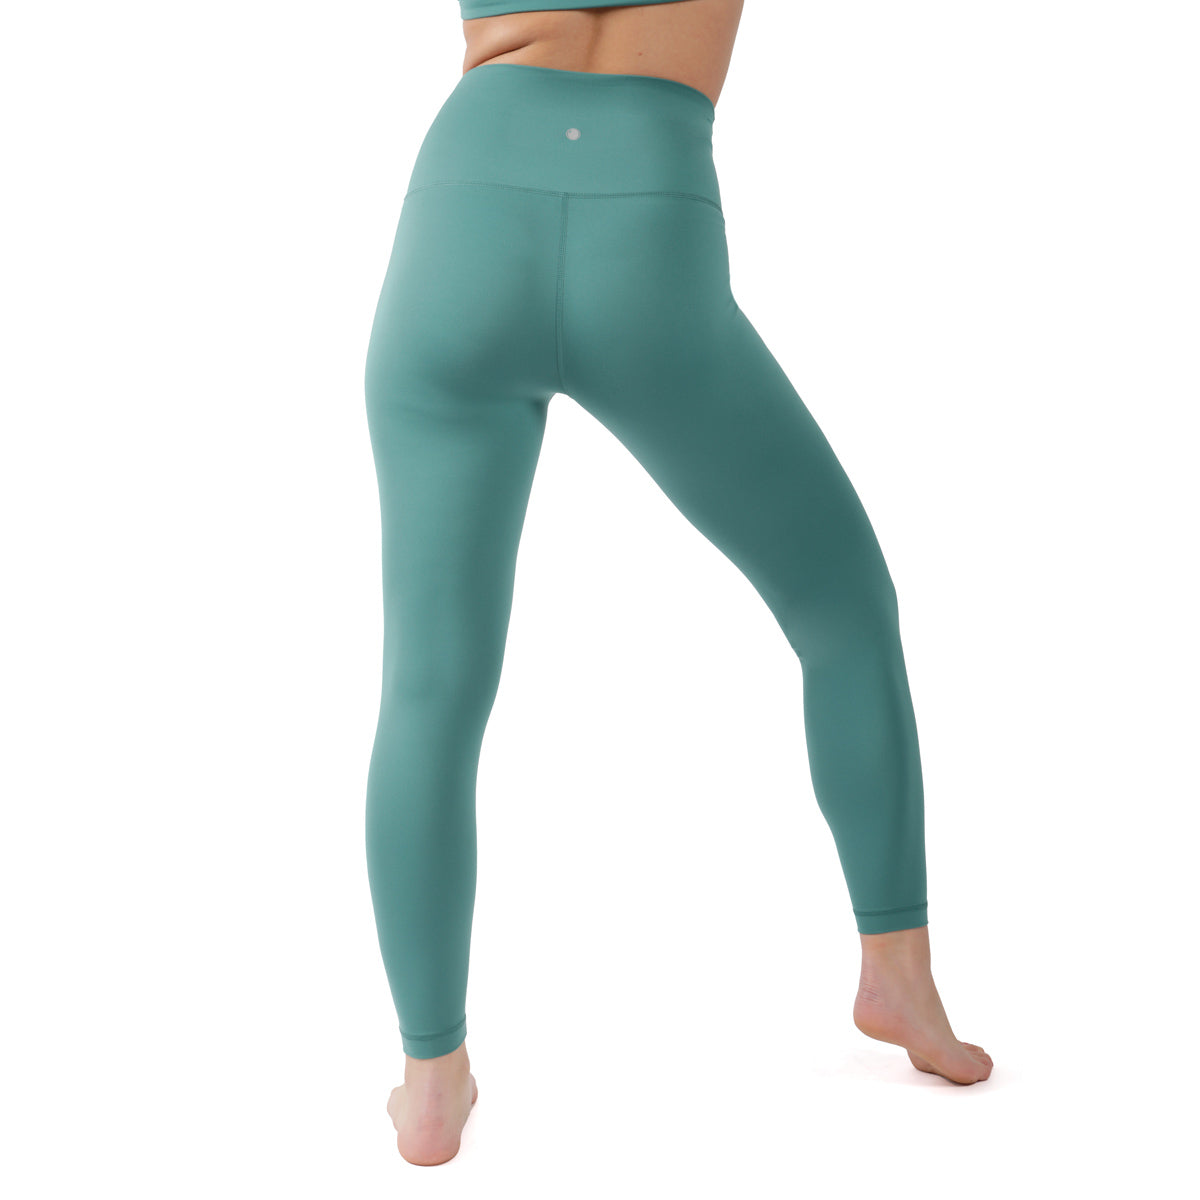 Yogalicious High Waist Squat Proof Lux Ankle Leggings for Women - Dynasty  Green Lux 25 - XS at  Women's Clothing store